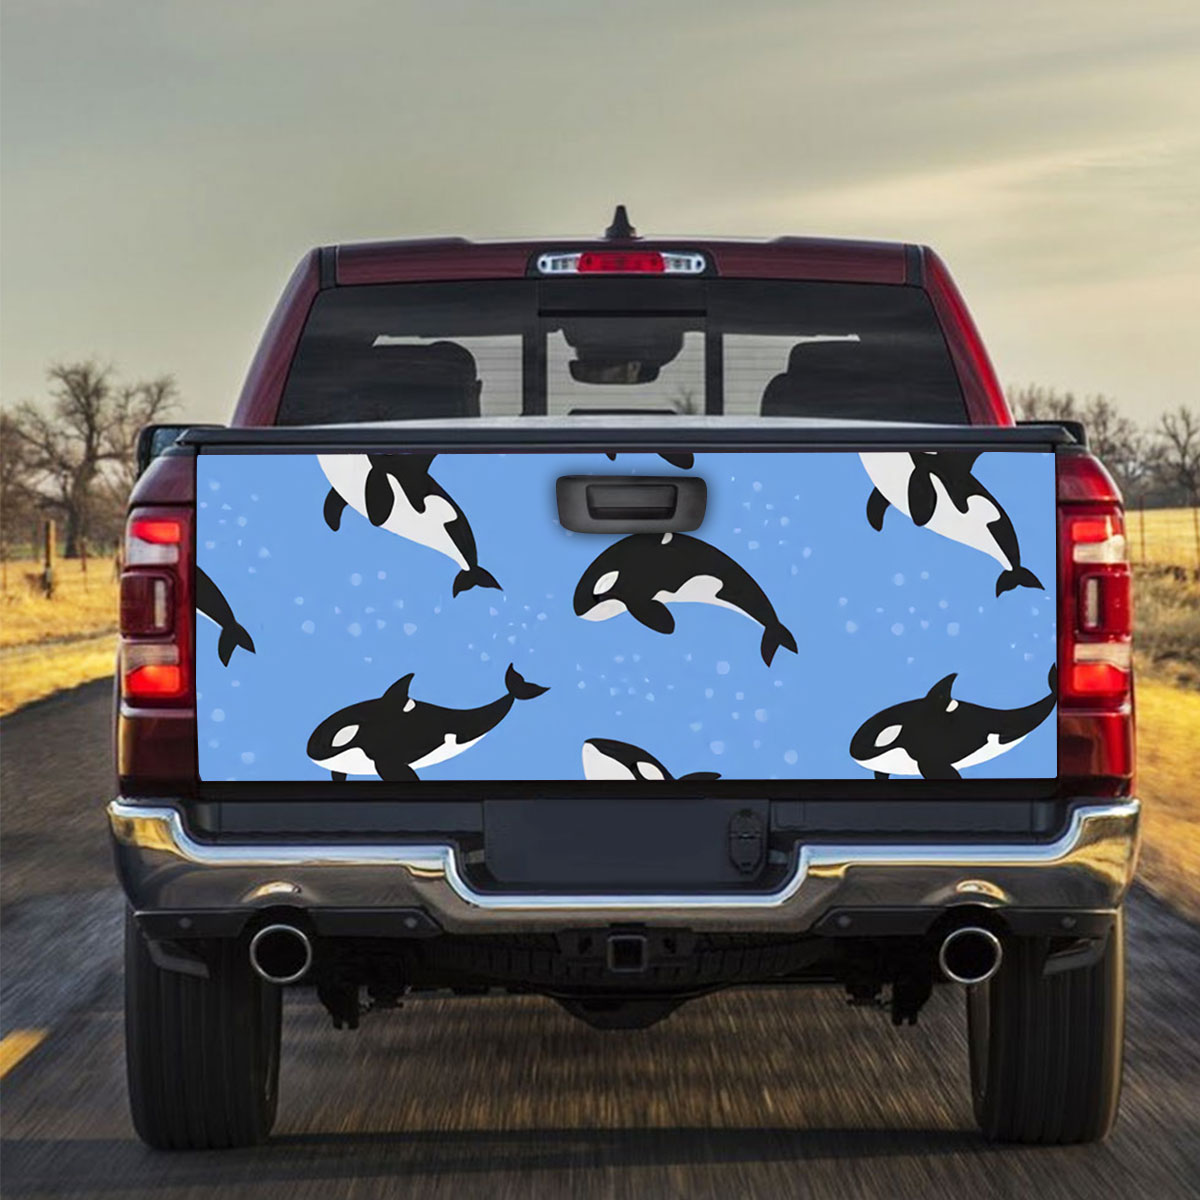 Ocean Orca Whale Truck Bed Decal